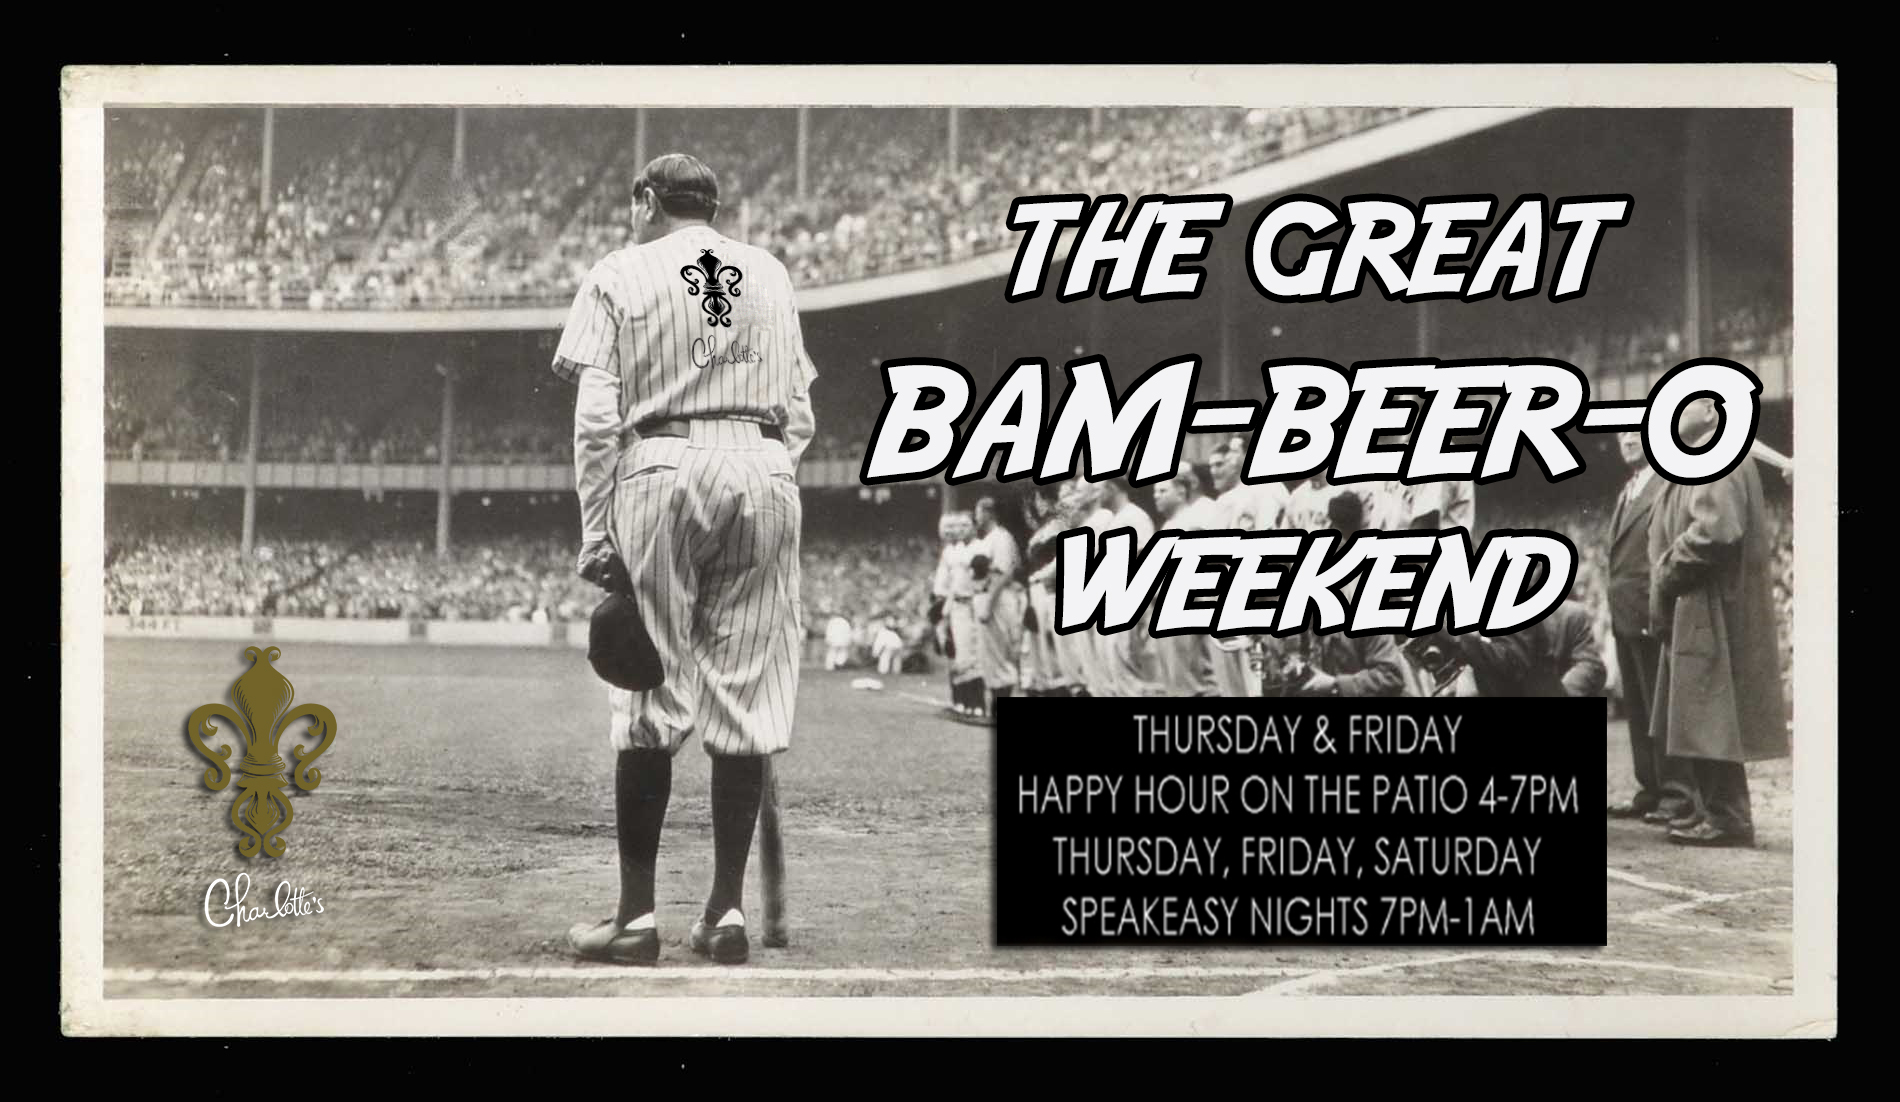 The Great Bam-Beer-O Weekend